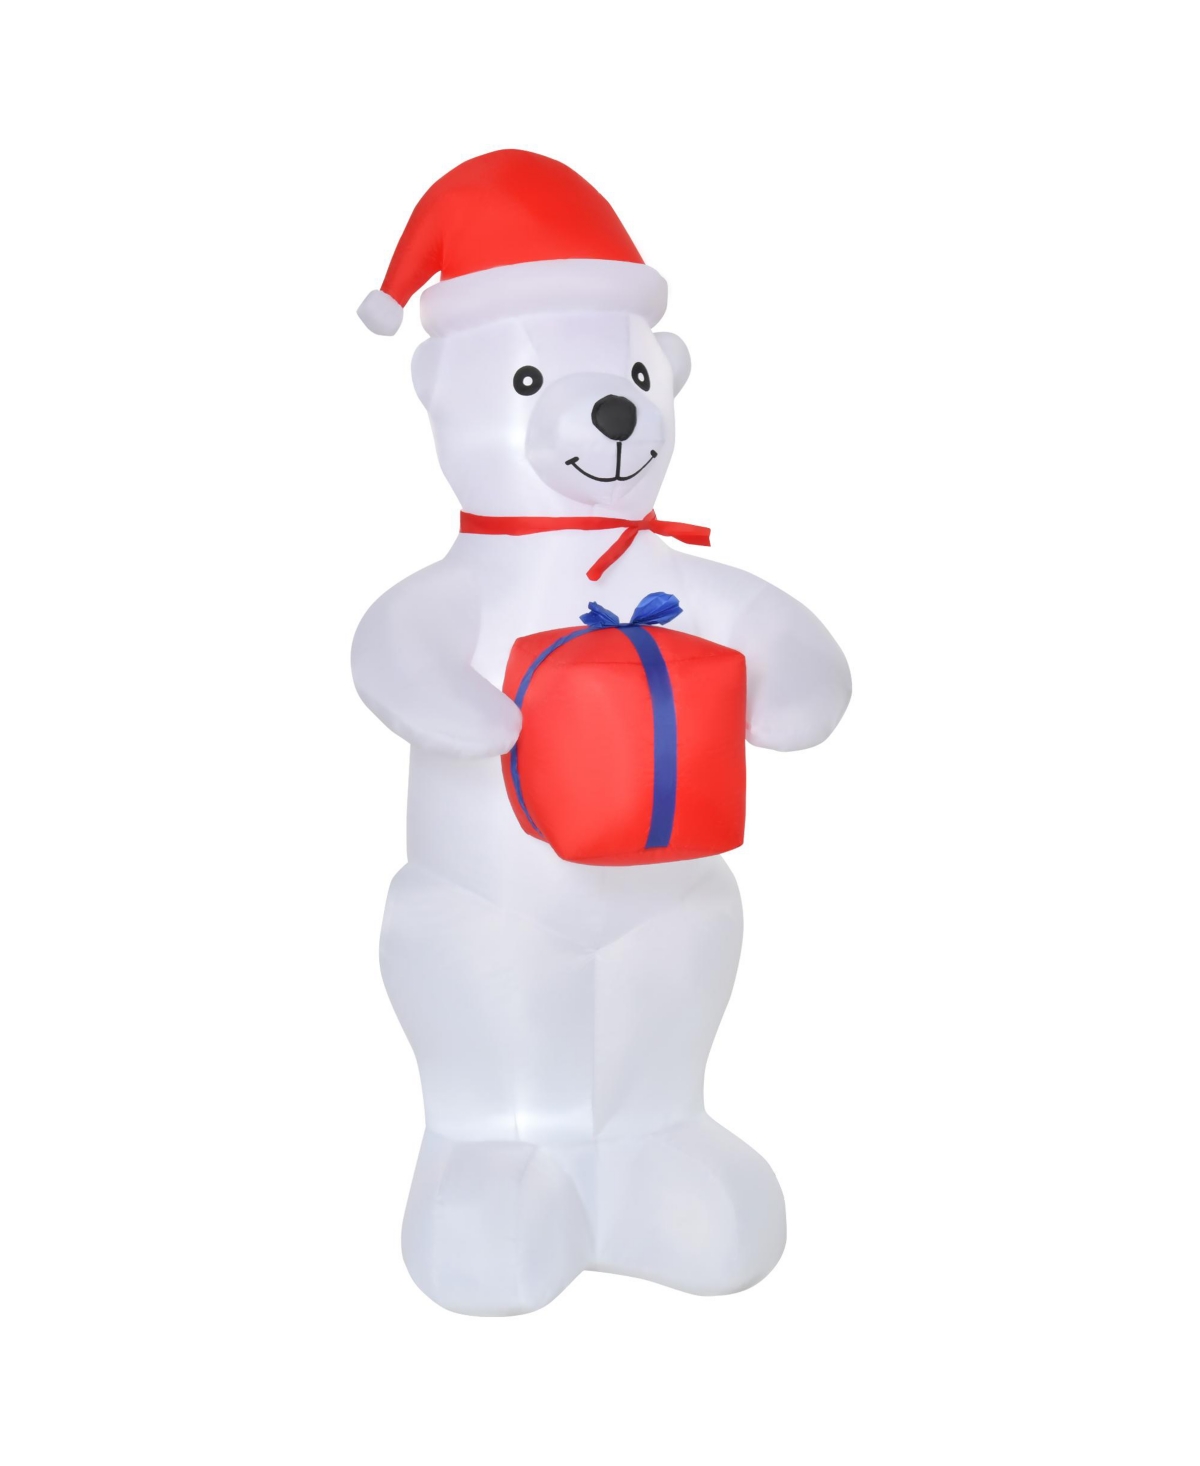 6' Christmas Inflatable Polar Bear w/ Present Blow-Up Yard Decoration - White